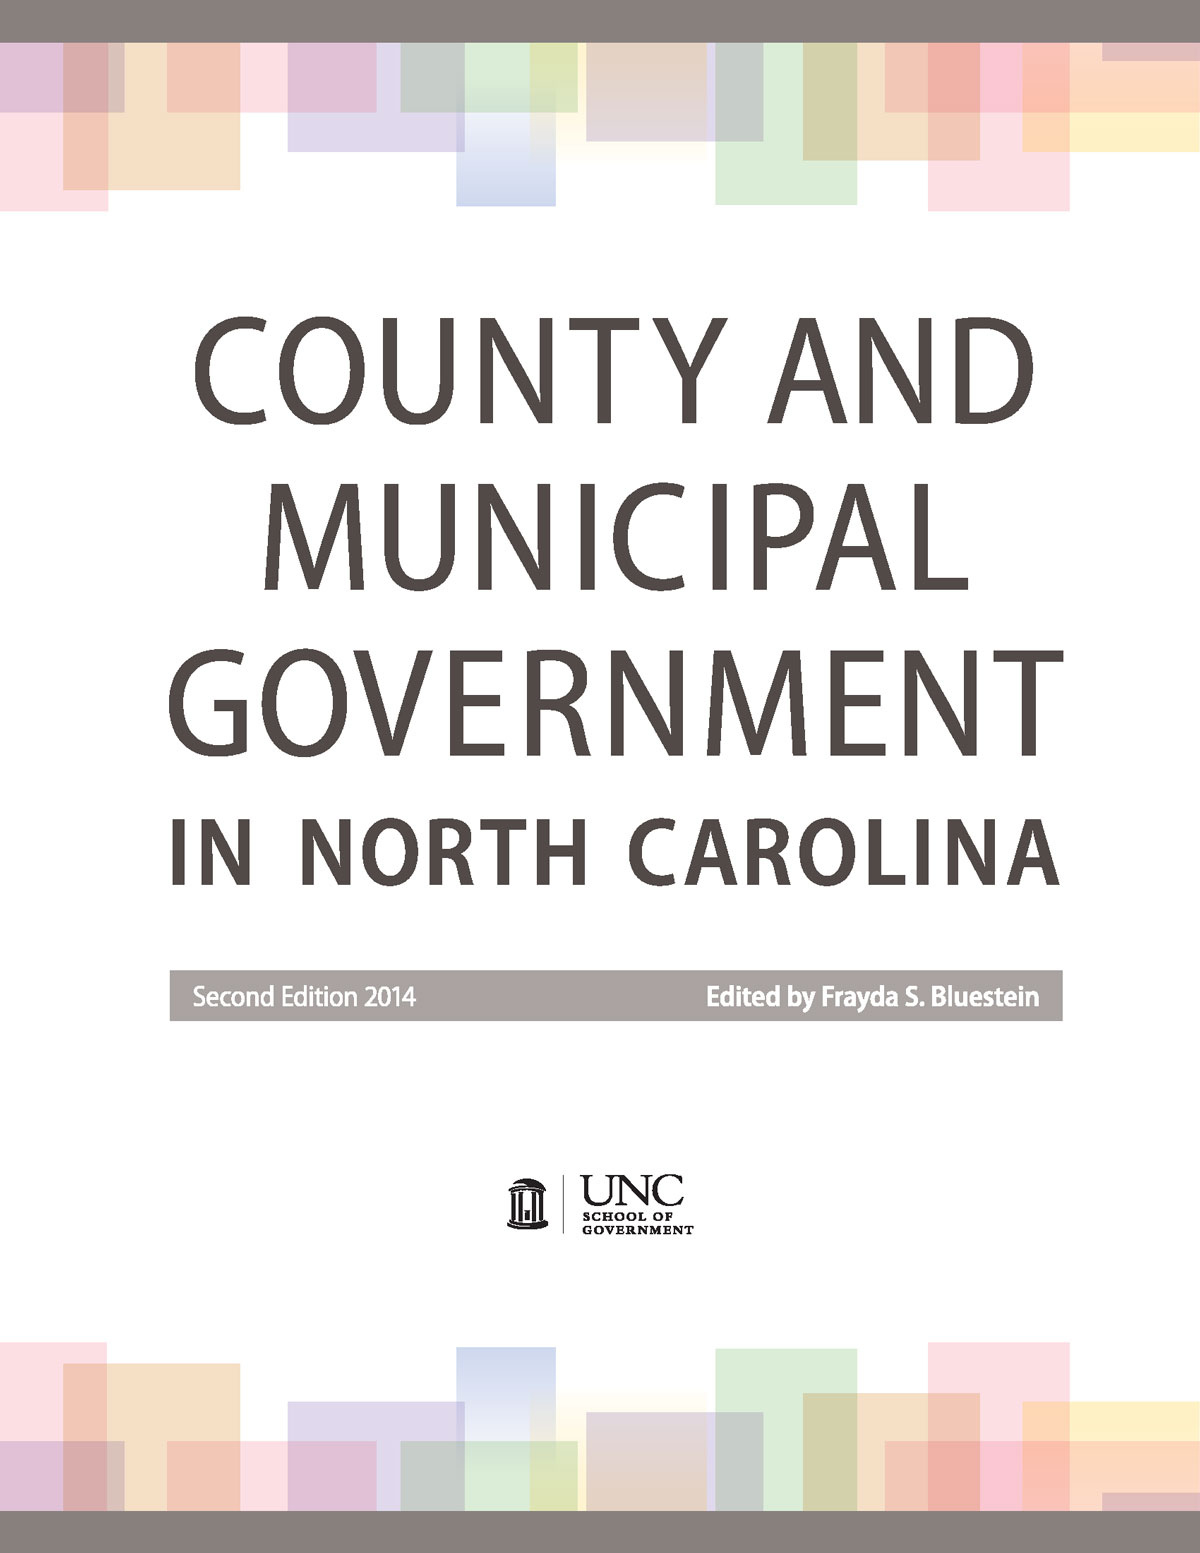 Cover image for County and Municipal Government in North Carolina, Second Edition, 2014 (E-book)